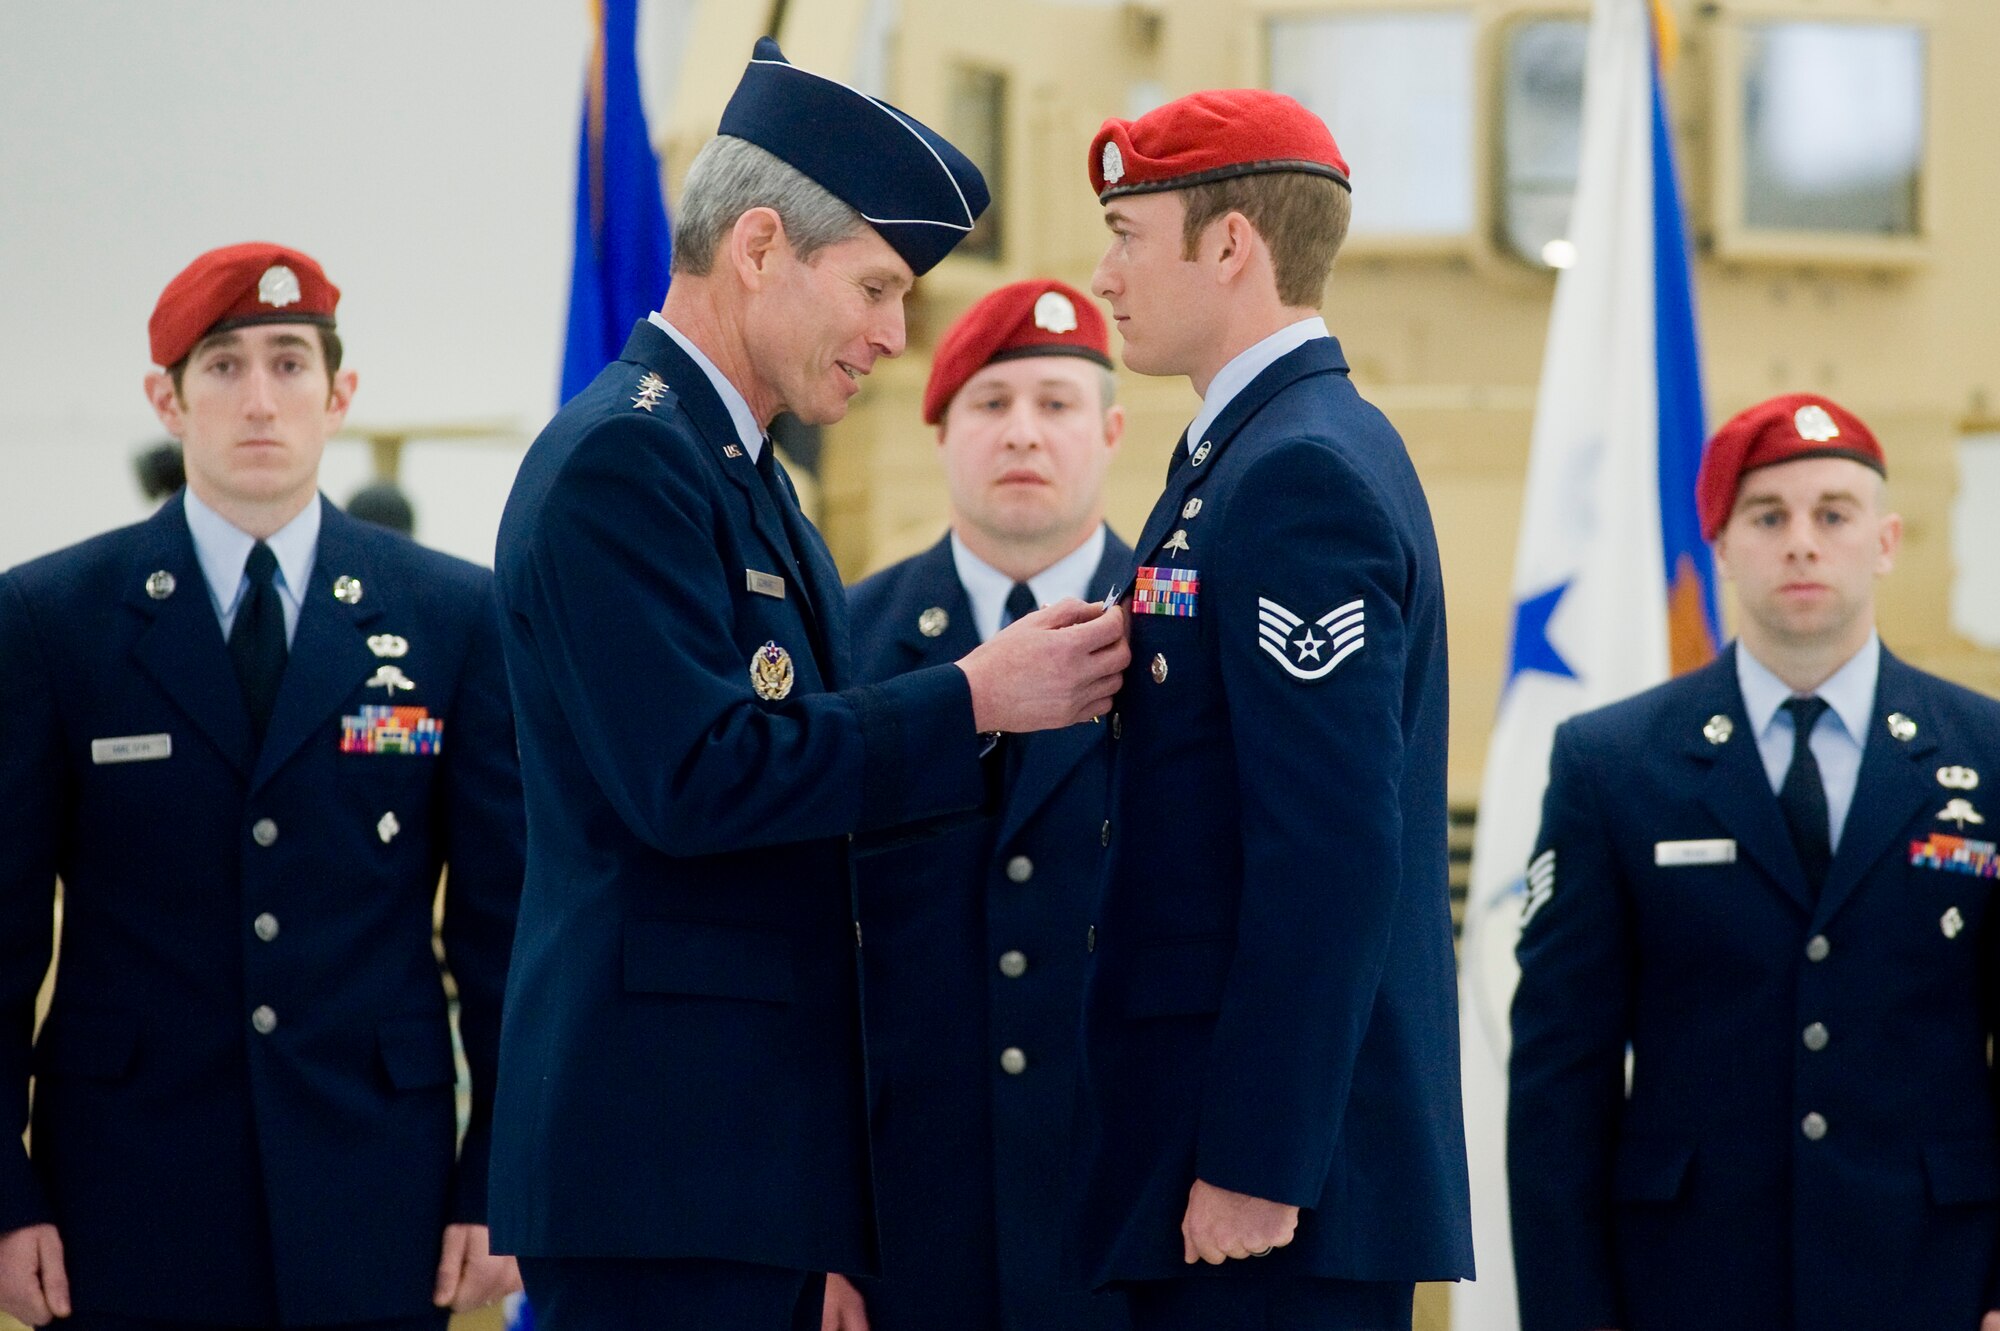 Chief of Staff of the Air Force Gen. Norton A. Schwartz pins the Silver Star on Staff Sgt. Evan Jones during a medal ceremony at Joint Base Lewis-McChord, Wash., April 29.  Sergeant Jones received both a Silver Star and a Bronze Star with Valor for two separate incidents during a deployment to Afghanistan in 2008. (U.S. Air Force photo/Abner Guzman)

